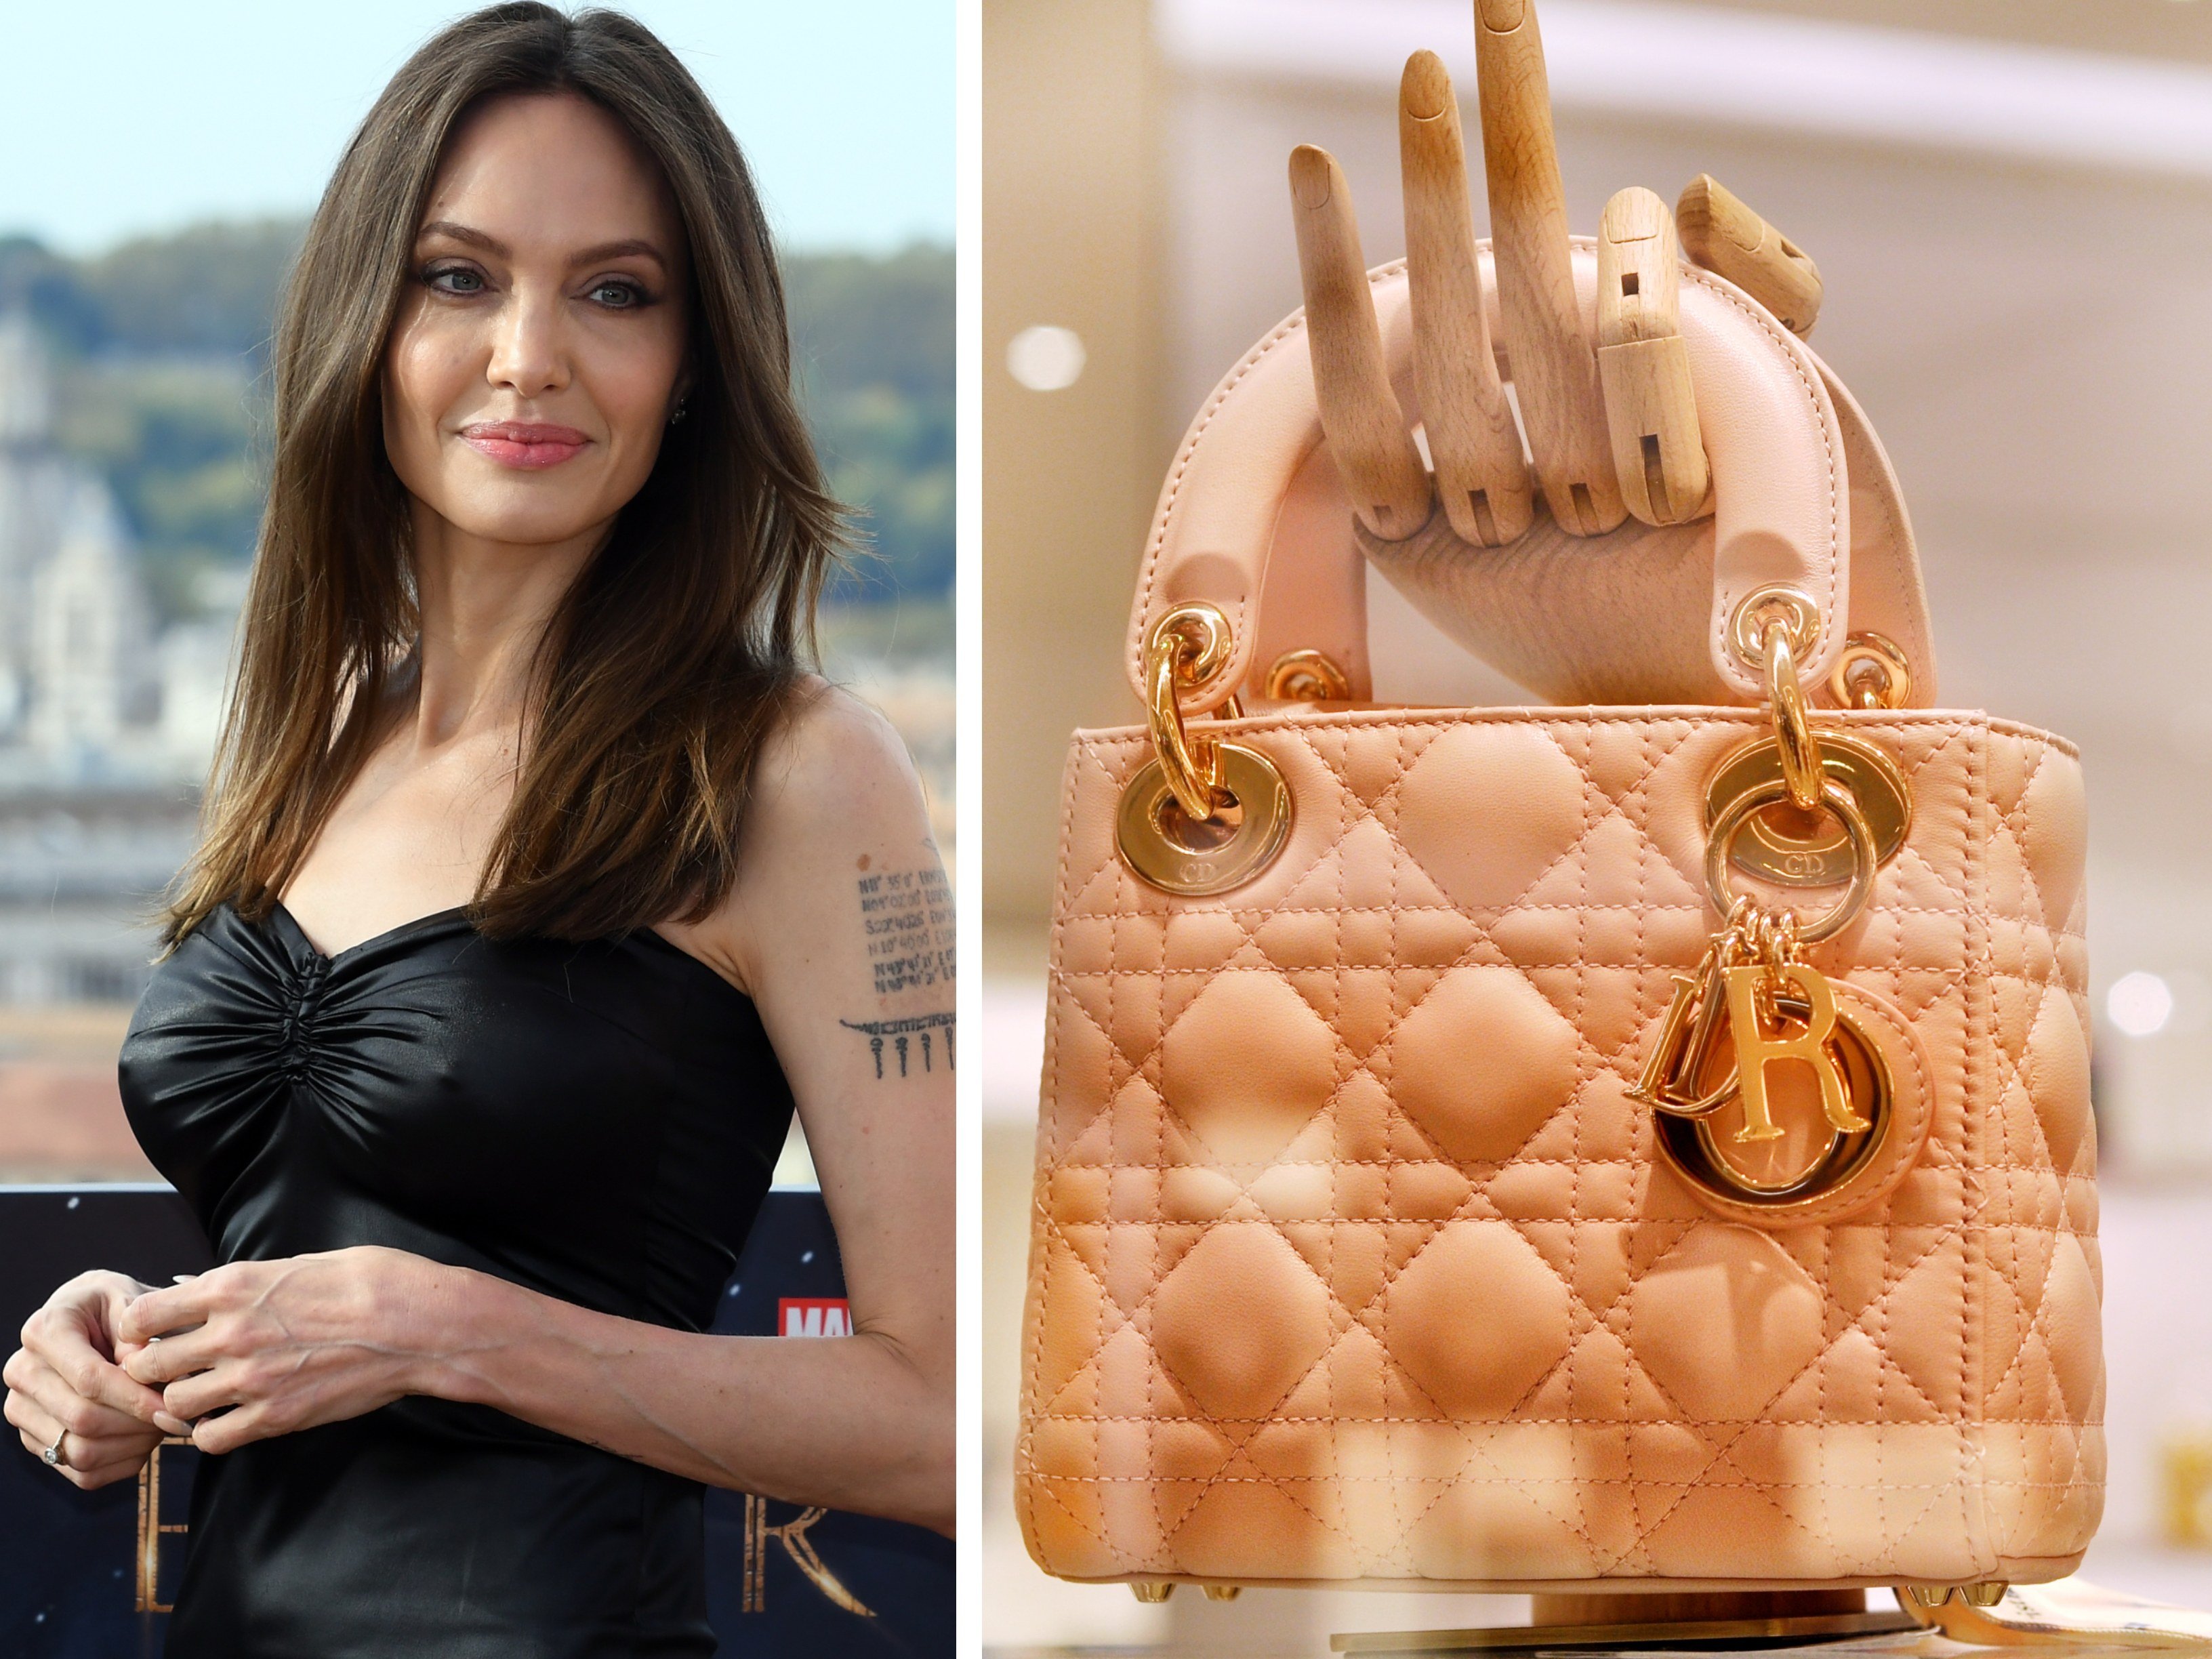 Angelina Jolie owns a collection of gorgeous designer handbags, including her Lady Dior. Photos: DPA, Shutterstock